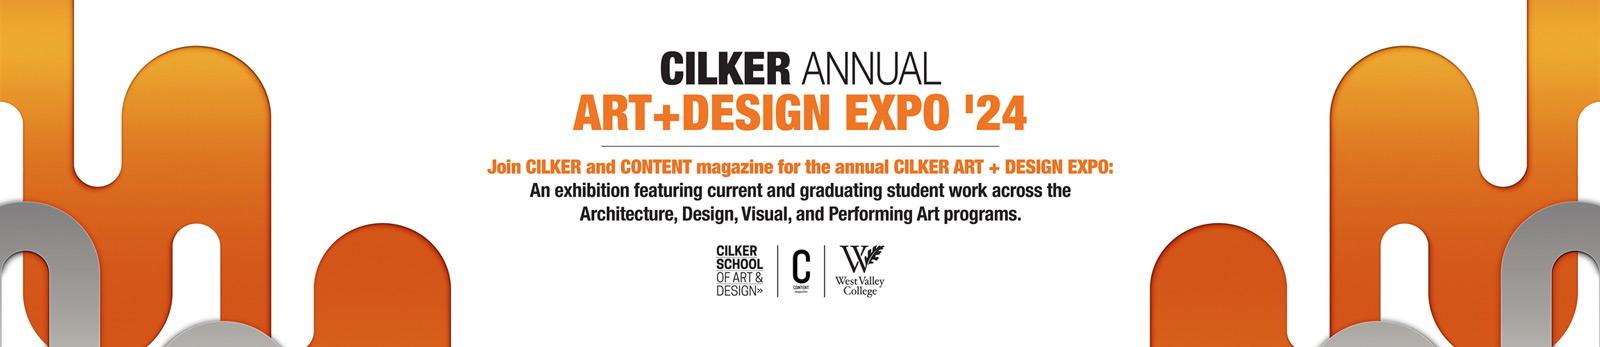 Cilker Annual Art and Design Expo